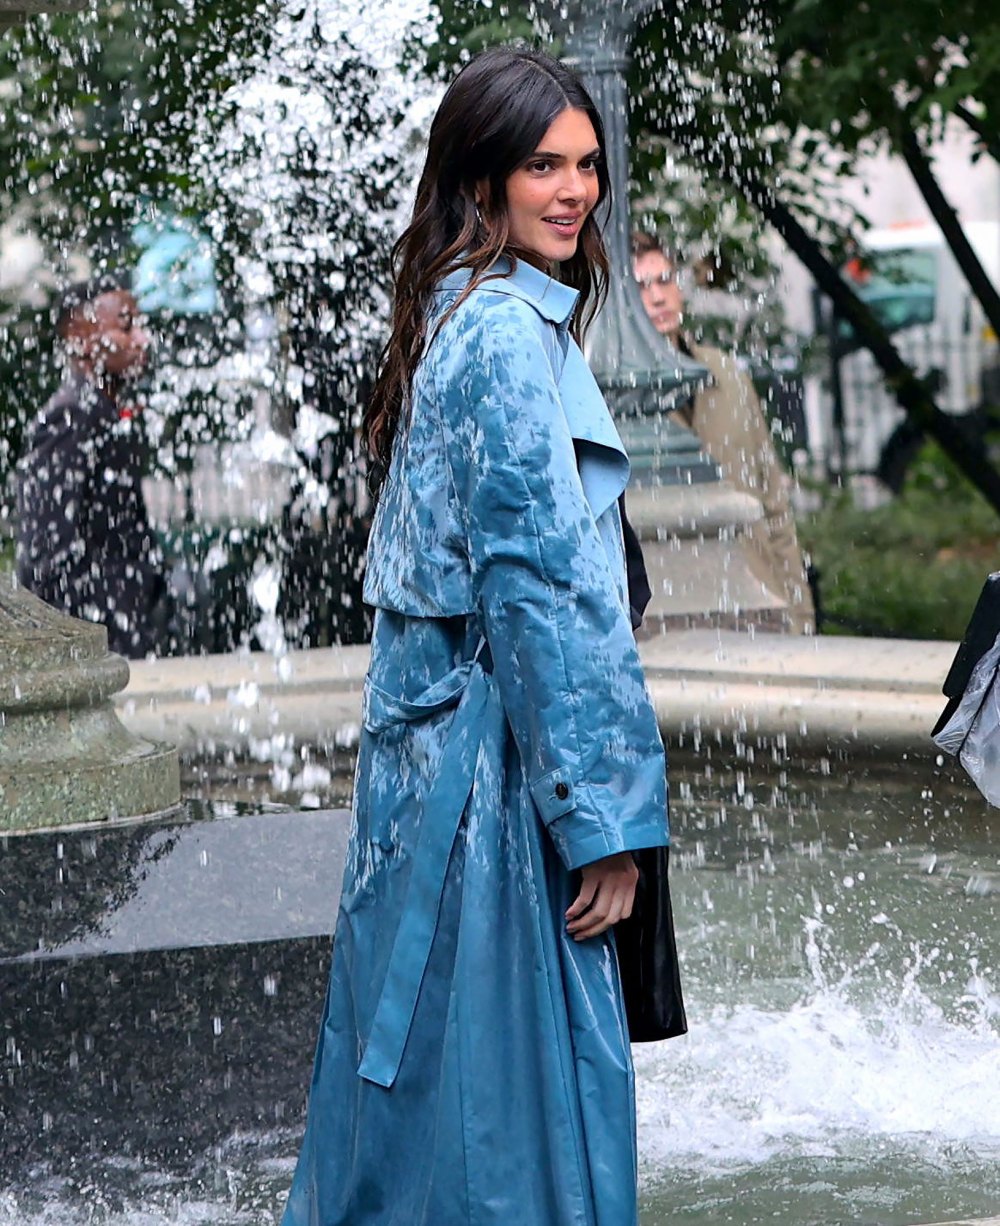 Feature Kendall Jenner Jumps in Fountain Fully Clothed